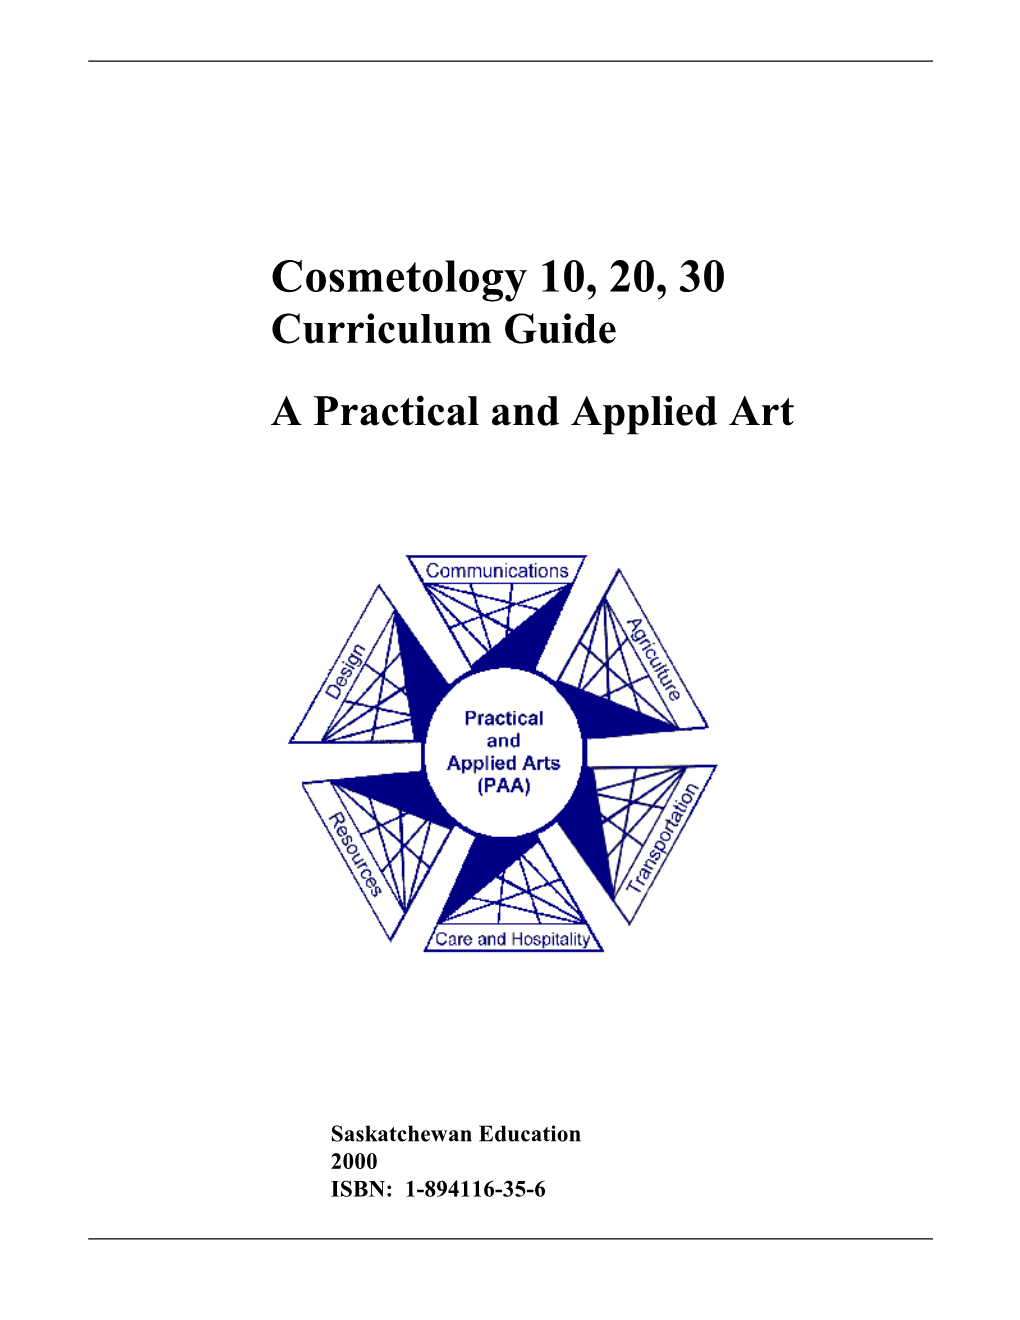 Cosmetology 10, 20, 30 Curriculum Guide a Practical and Applied Art